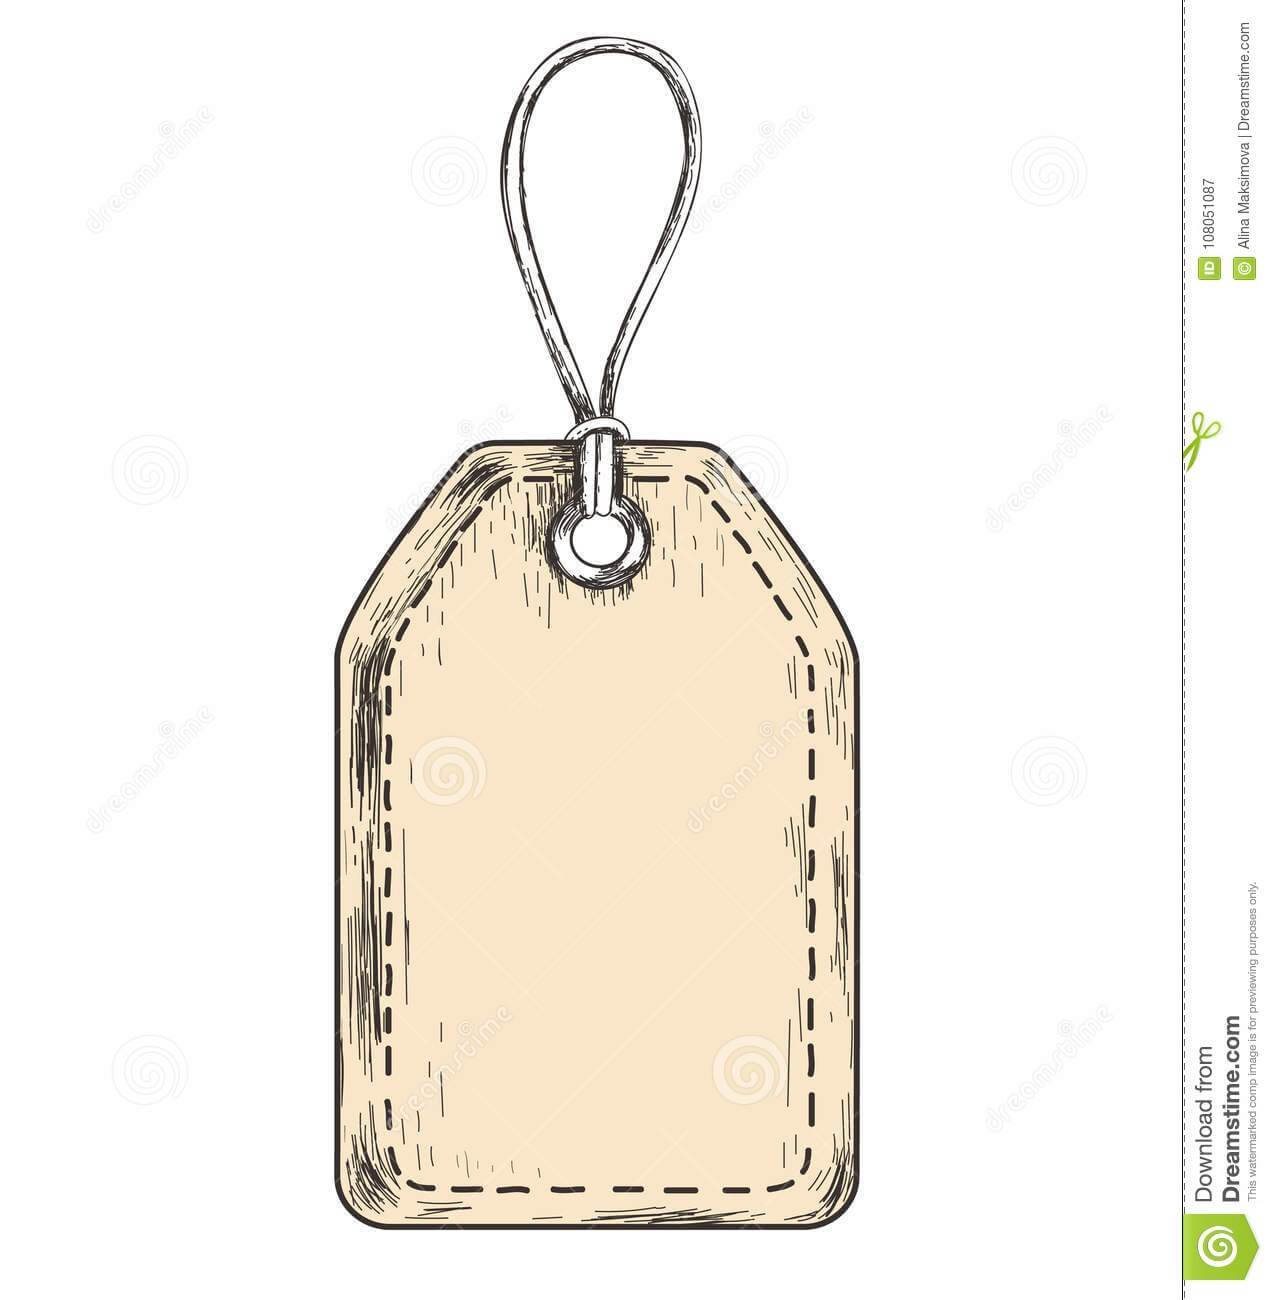 sketch-tag-for-sales-stock-vector-illustration-of-luggage-for-blank-luggage-tag-template